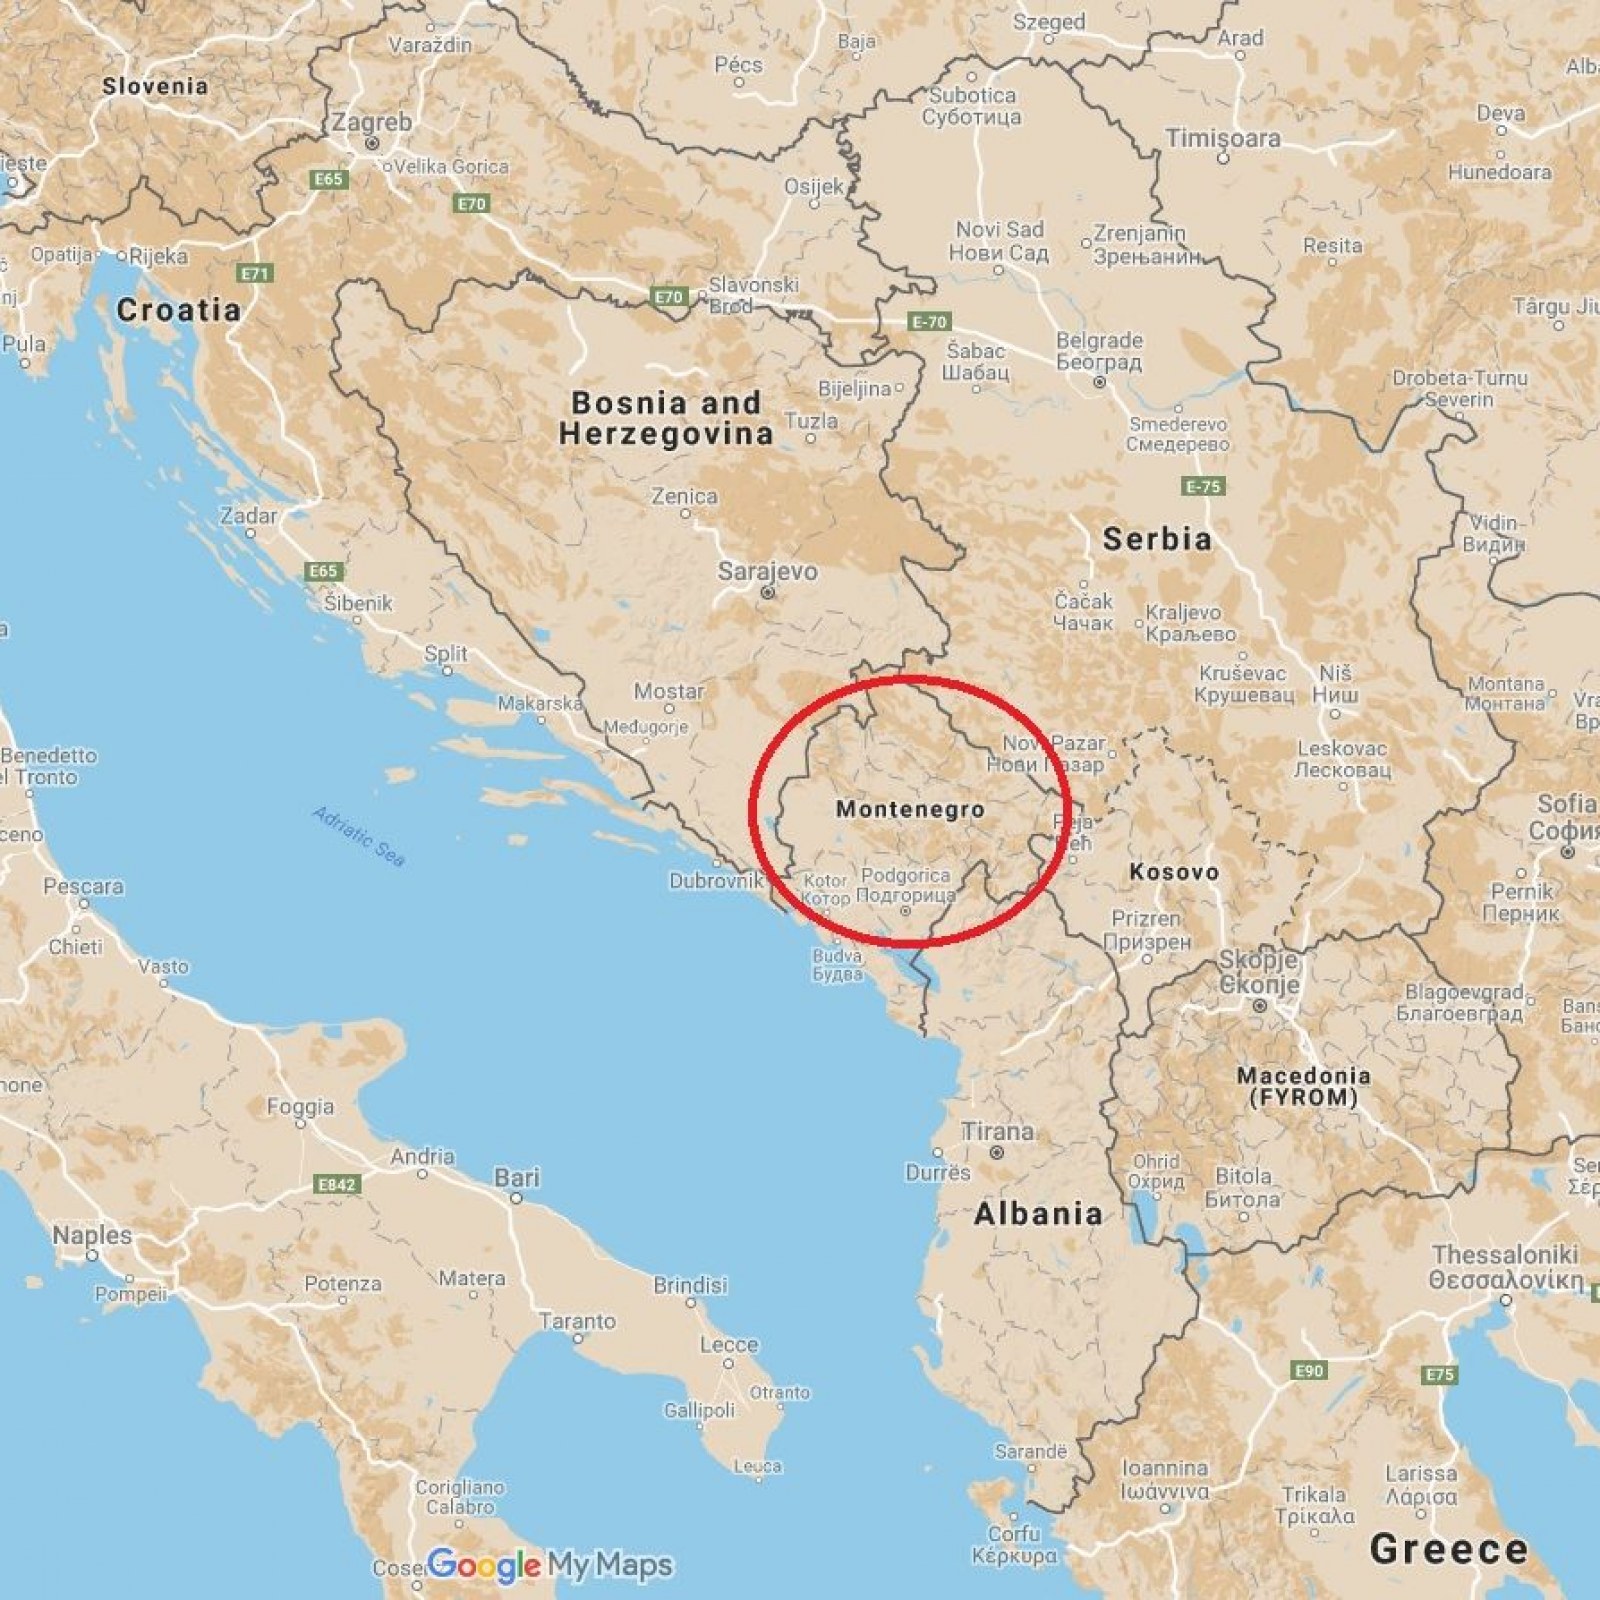 Montenegro On The Map Where Is Montenegro? Trump Puts Tiny NATO State on the Map